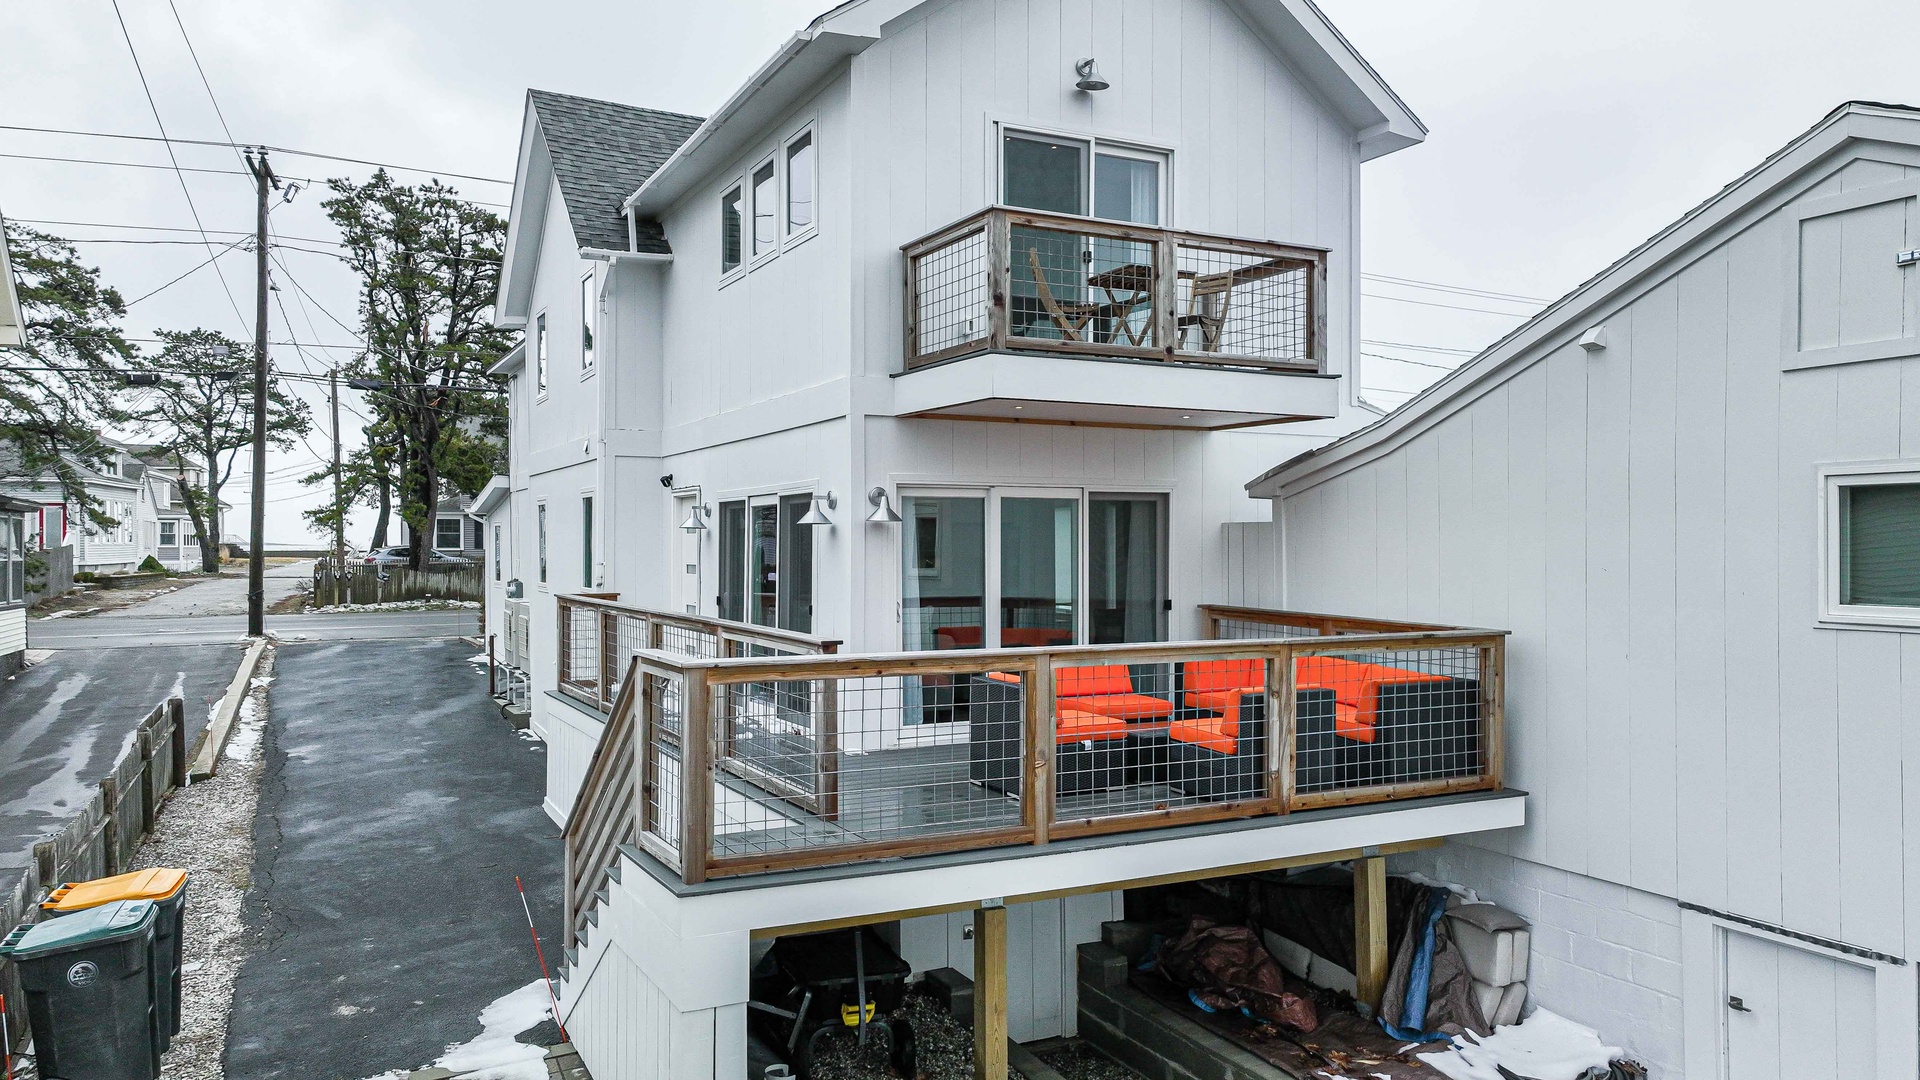 Bask in the charm of the wrap-around deck, complete with a private deck off the primary bedroom.